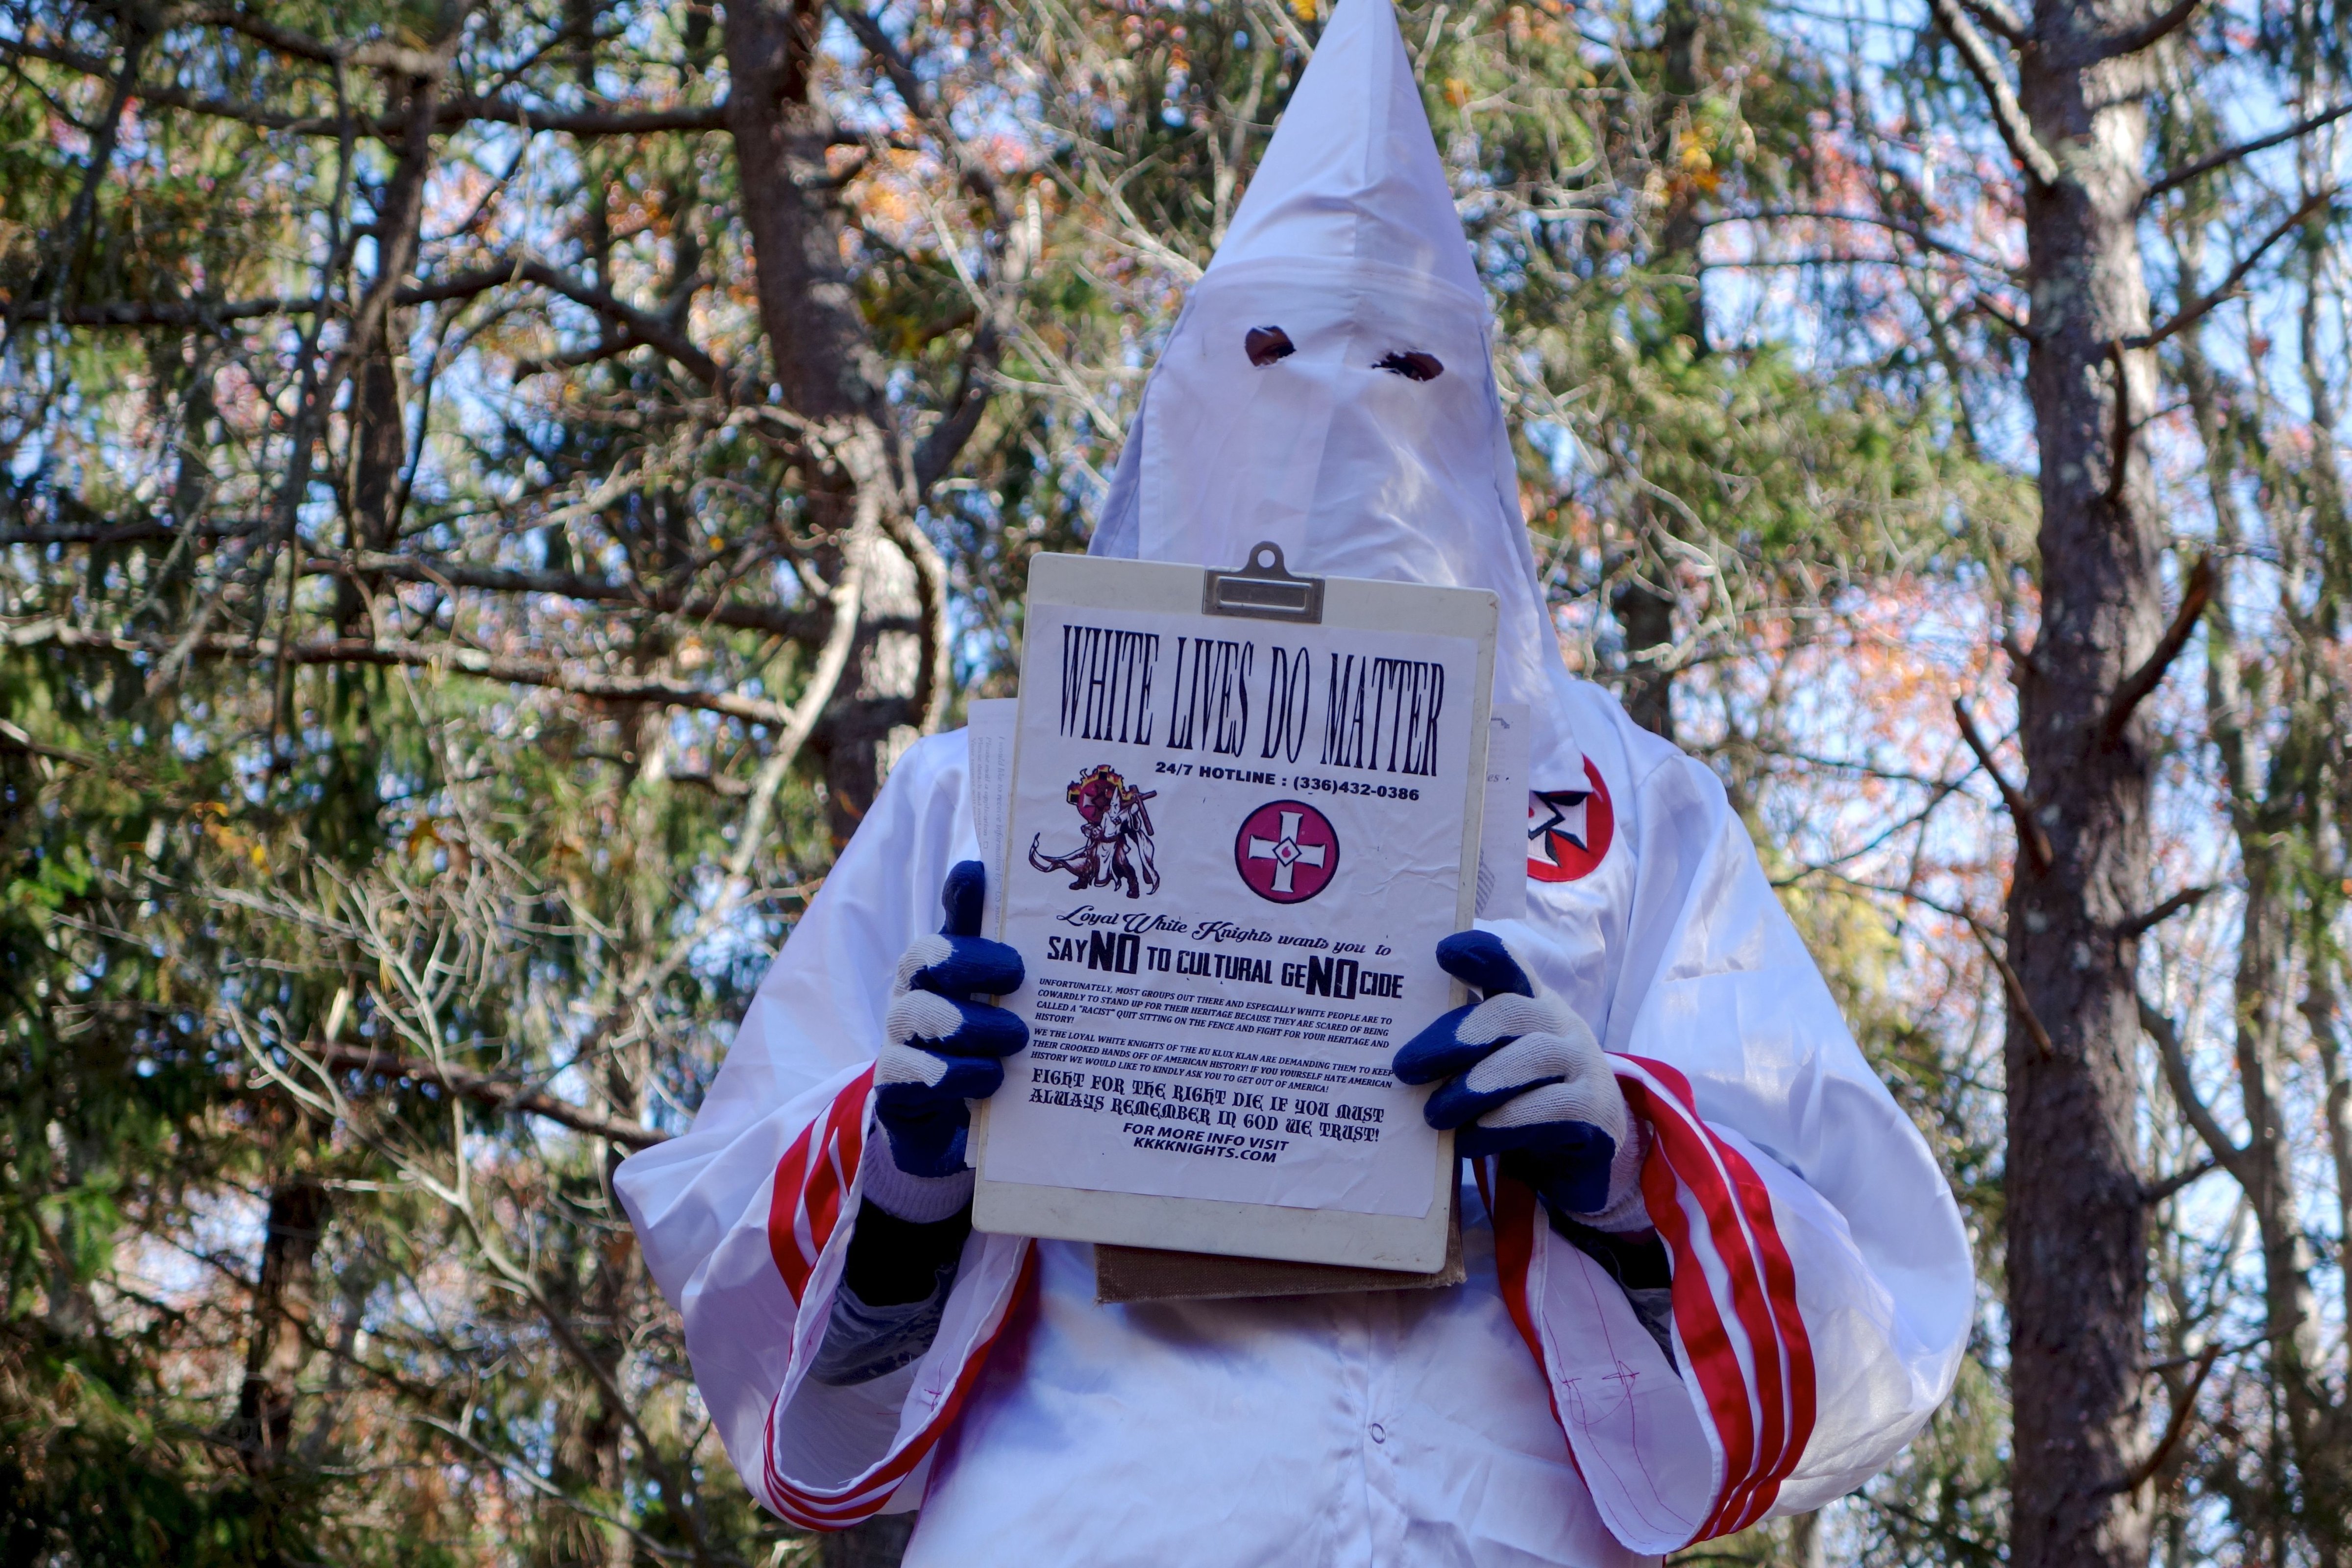 A member of the Ku Klux Klan who says his name is Gary Munker poses for a photo during an interview with AFP in Hampton Bays, New York on November 22, 2016. (WILLIAM EDWARDS&mdash;AFP/Getty Images)